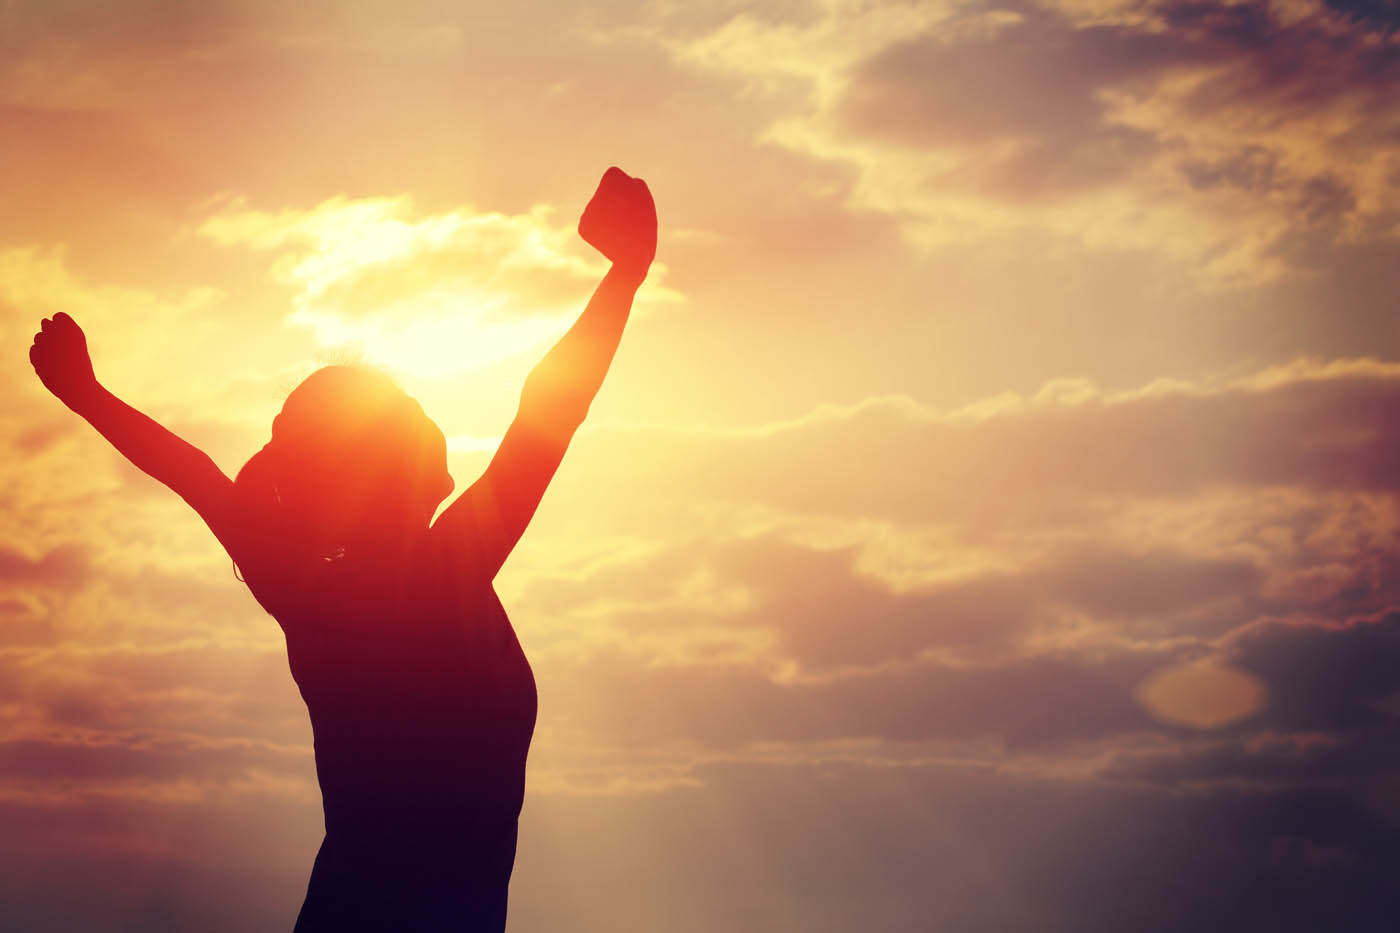 A woman standing in the light with her arms up in the air - learn how you can get relief with Light Lounge's back pain management in Holland, MI.